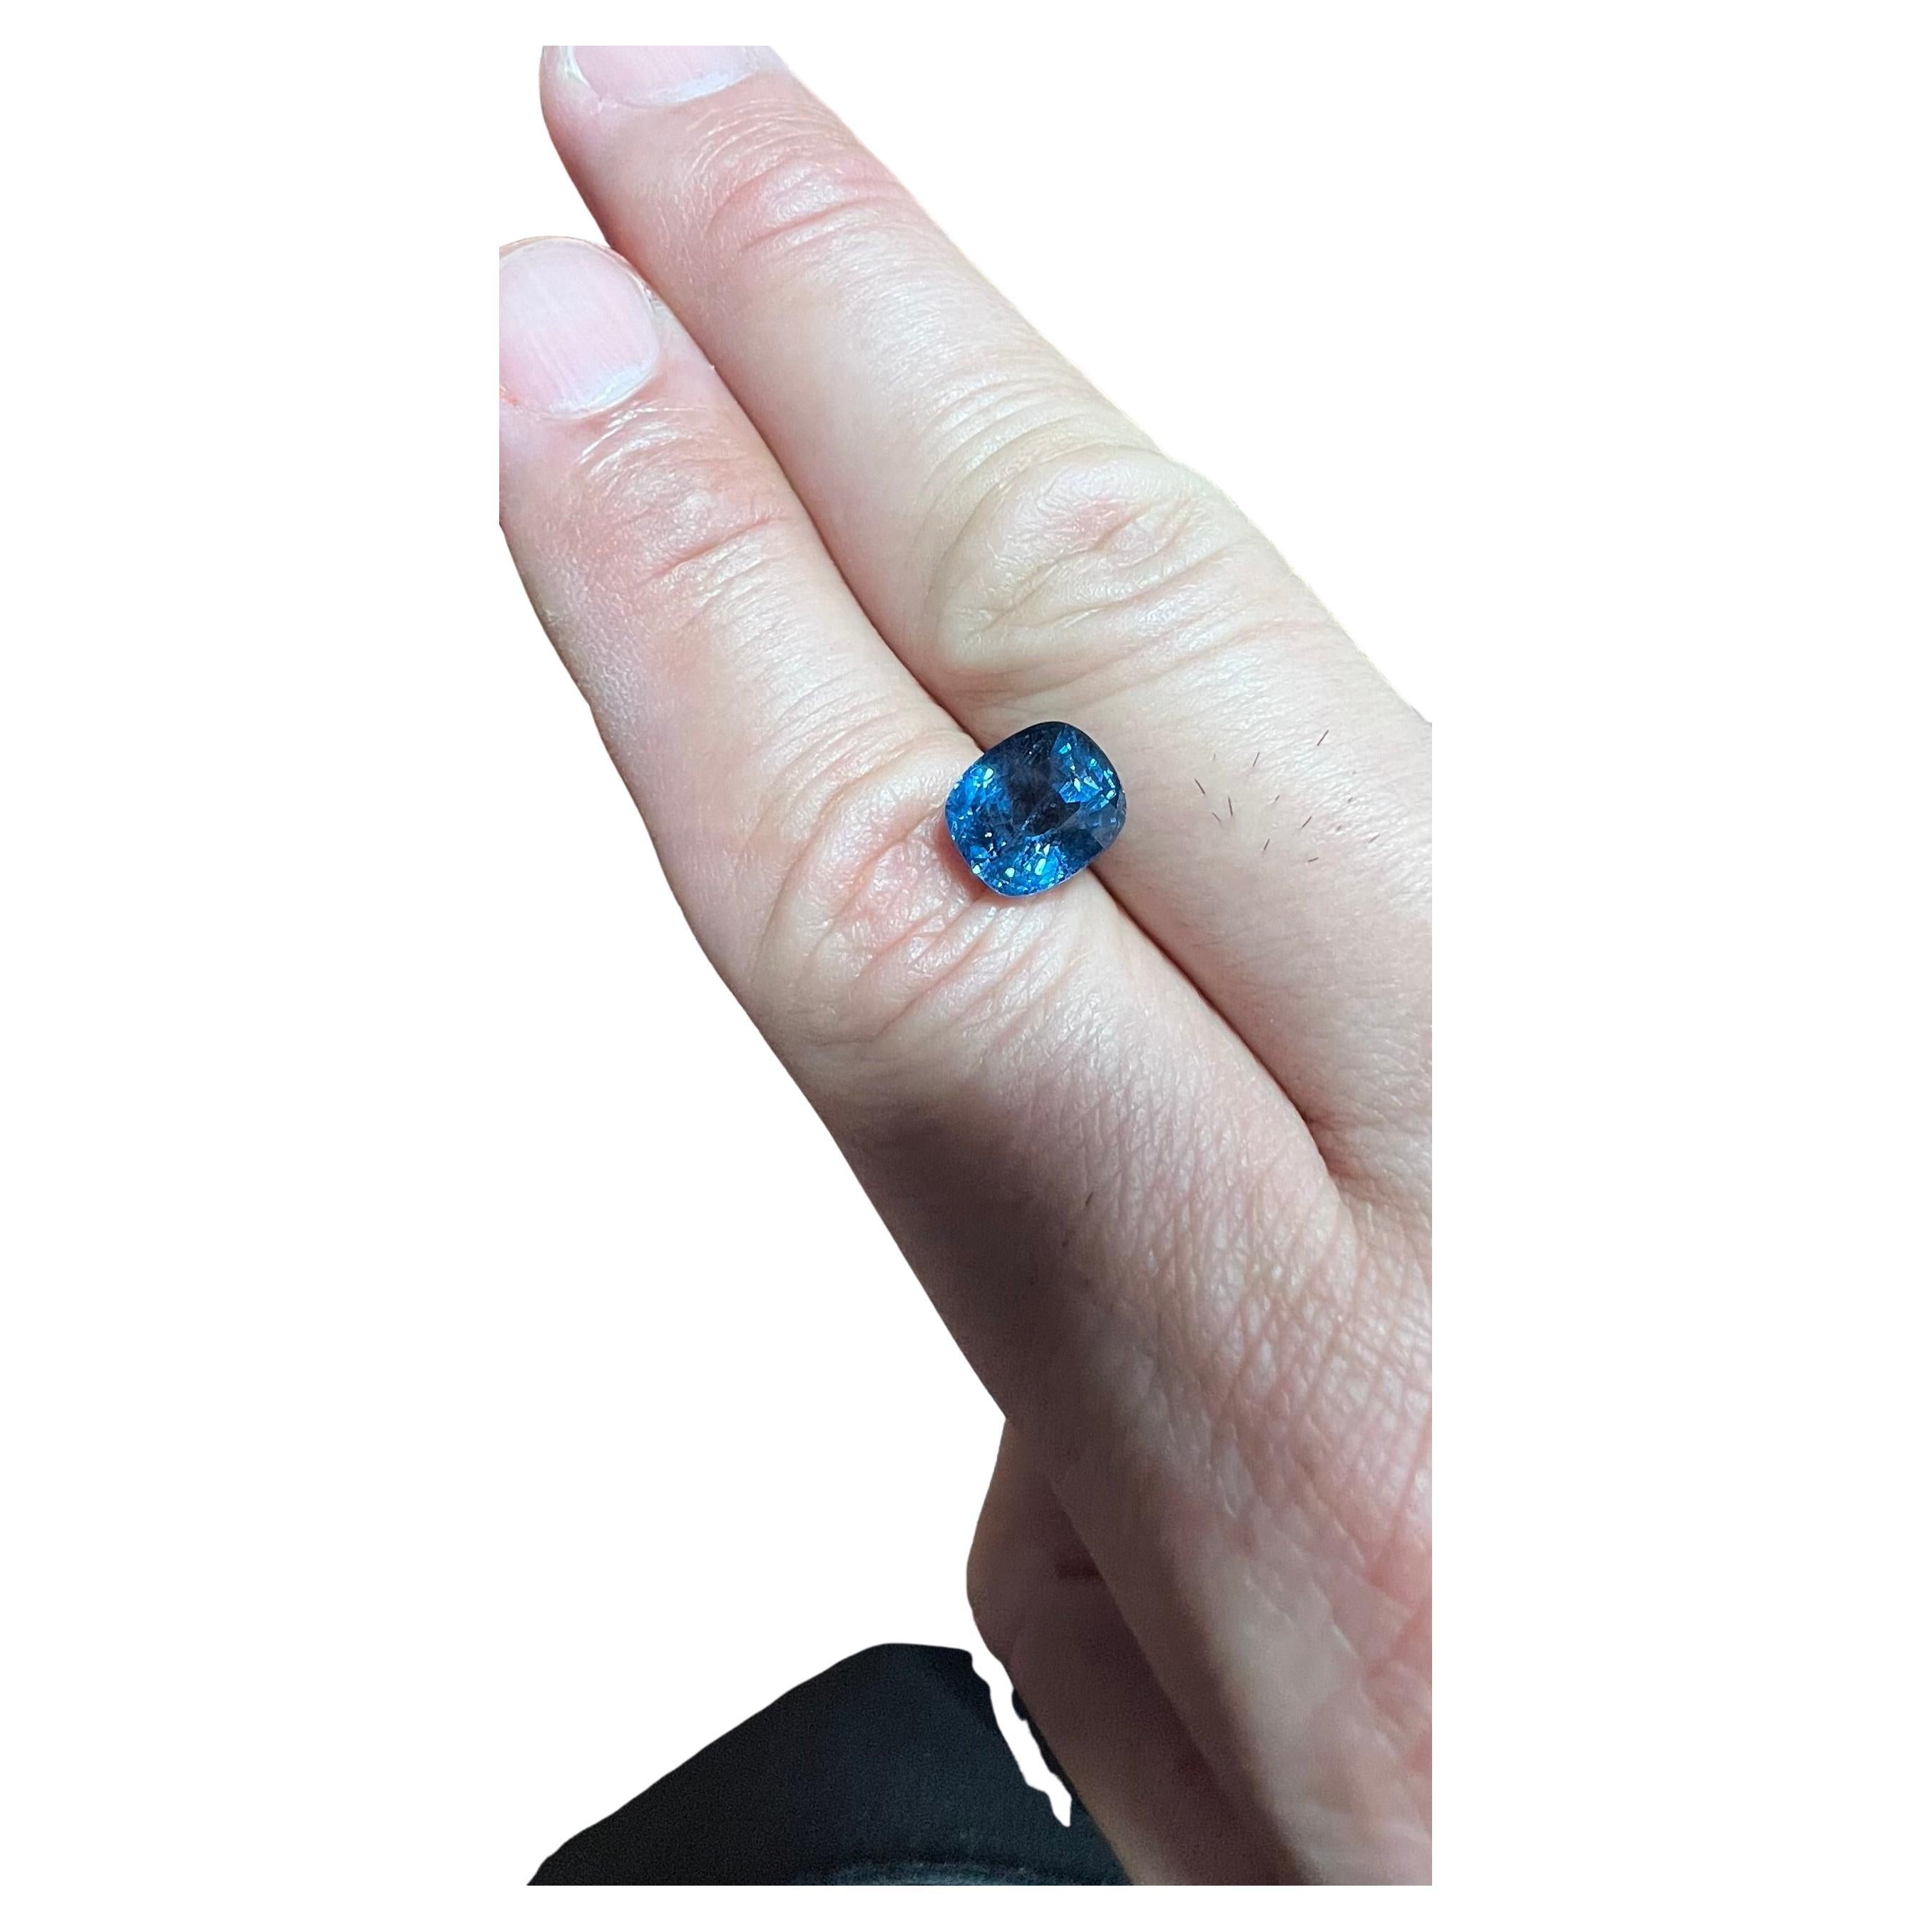 
Hailing all the way from Luc Yen Vietnam is this Impressive 4.46 Carat Neon Blue Cobalt Spinel. It’s the biggest known in the United States and I only have heard and seen of two others that’s bigger . This 4.46 Carat Cobalt Spinel is 100% Natural